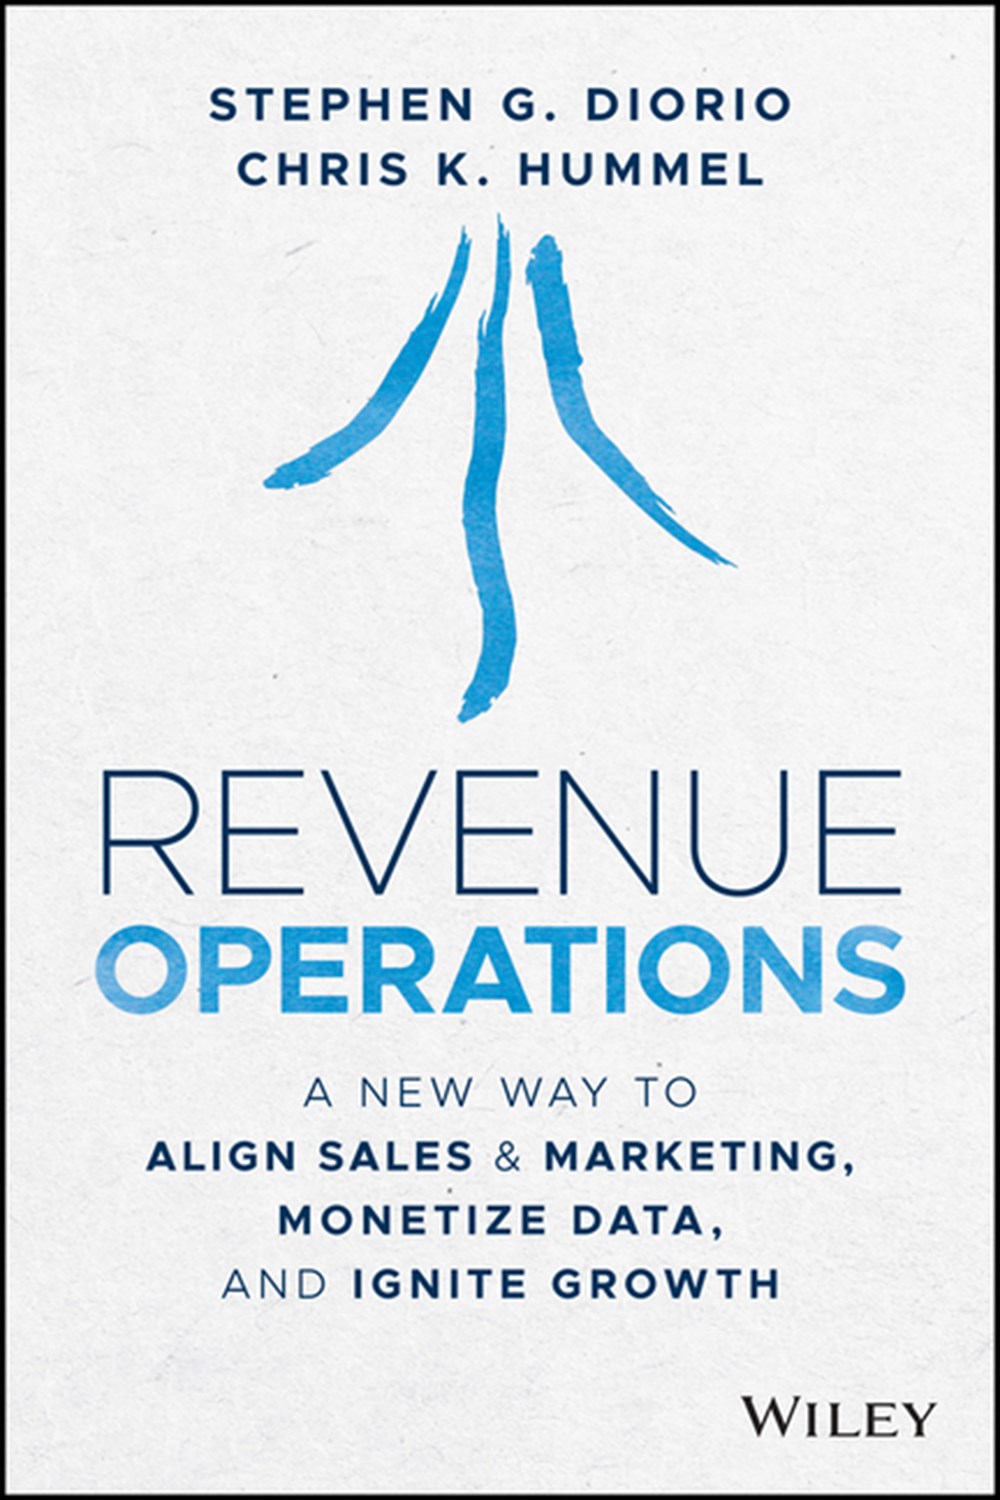 Revenue Operations A New Way to Align Sales & Marketing, Monetize Data, and Ignite Growth